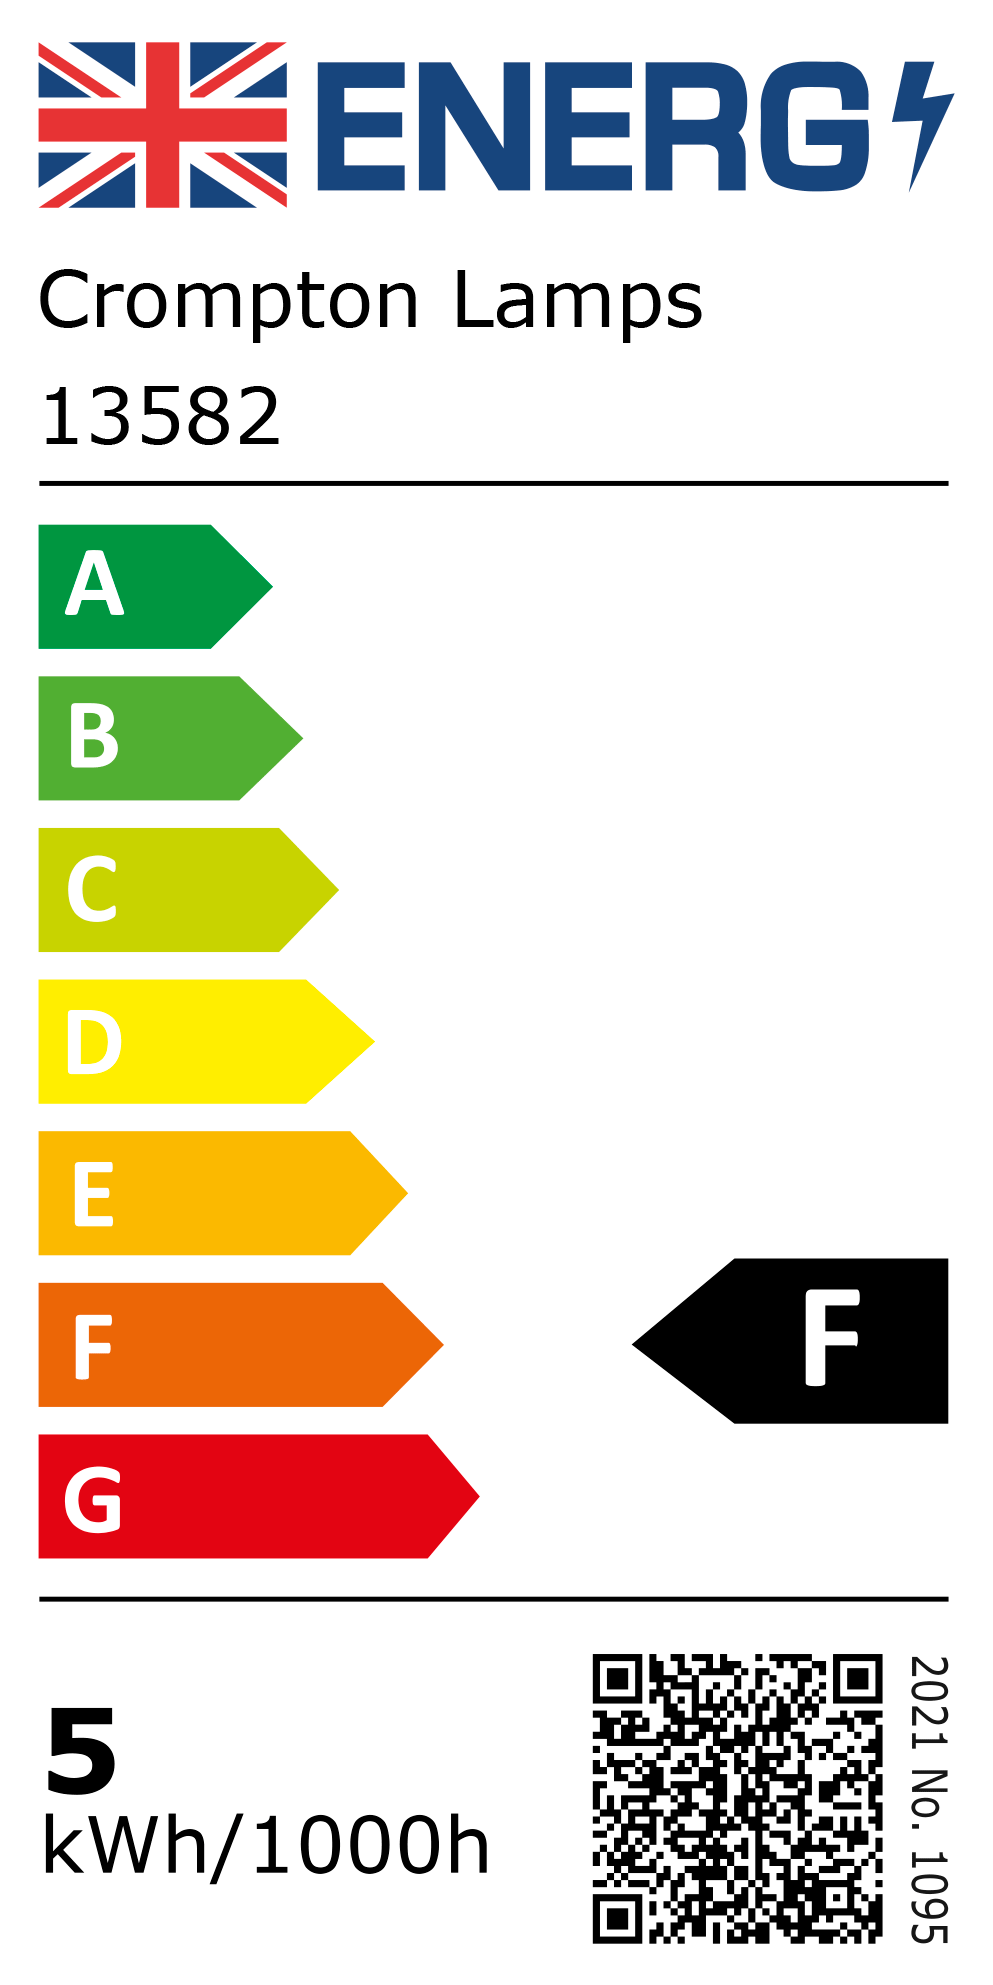 New 2021 Energy Rating Label: Stock Code 13582